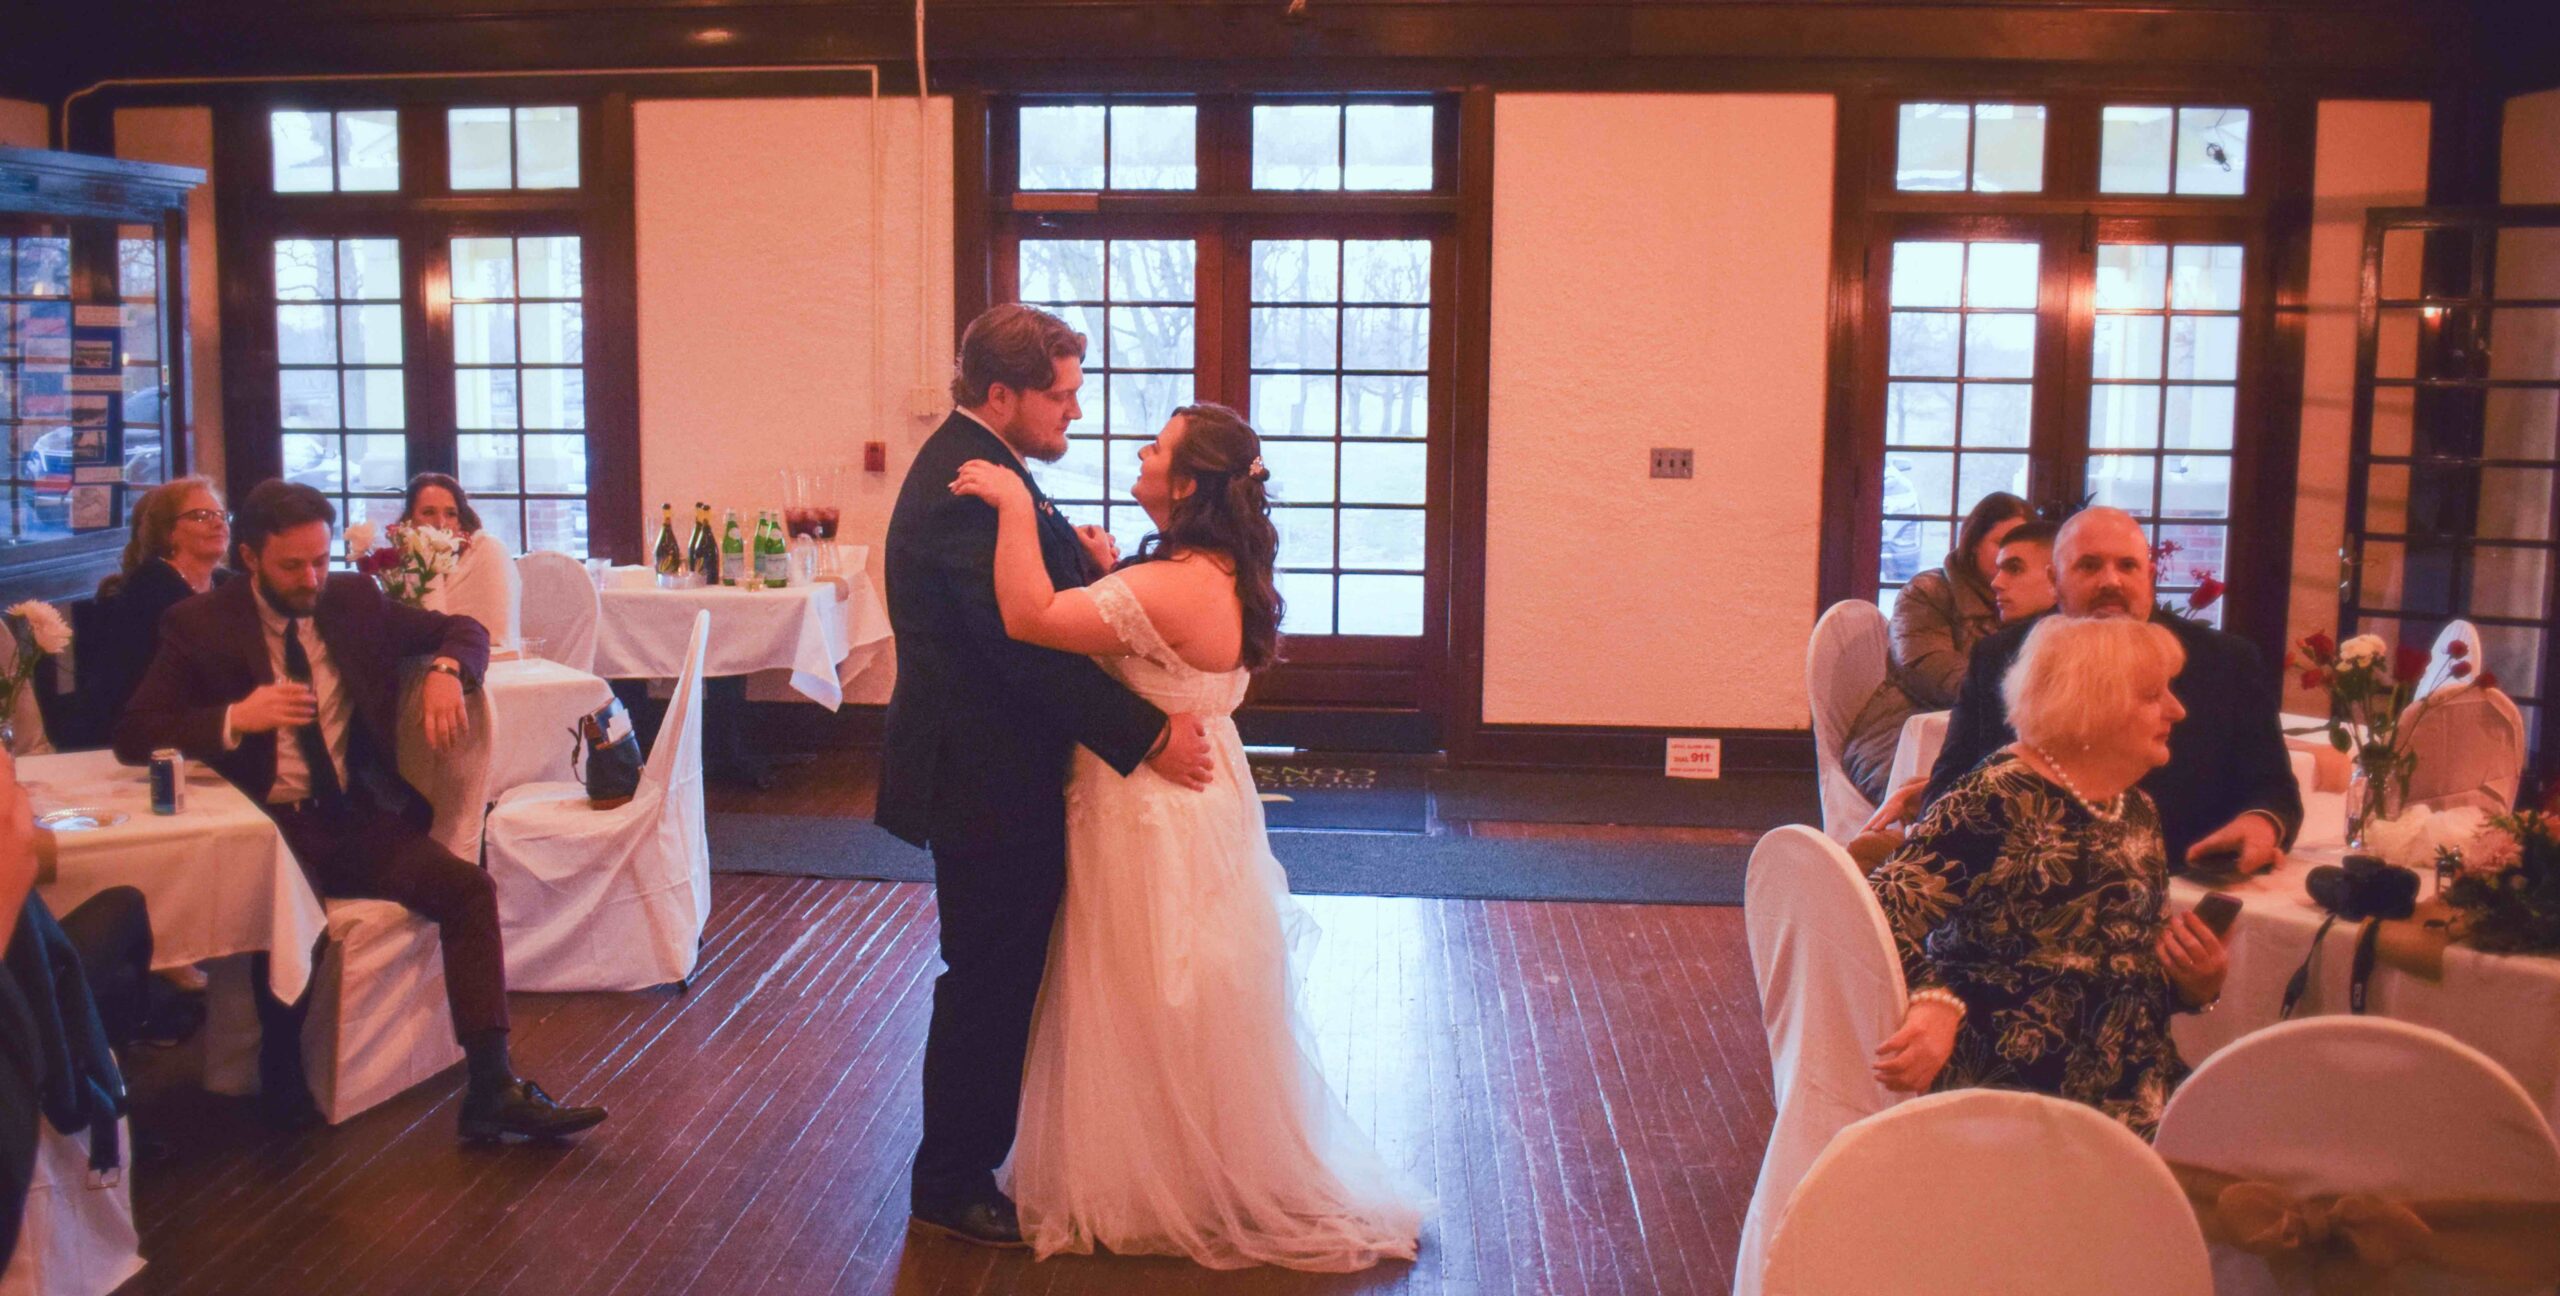 Bride and groom dancing in the Parkside Lodge, with guests seated